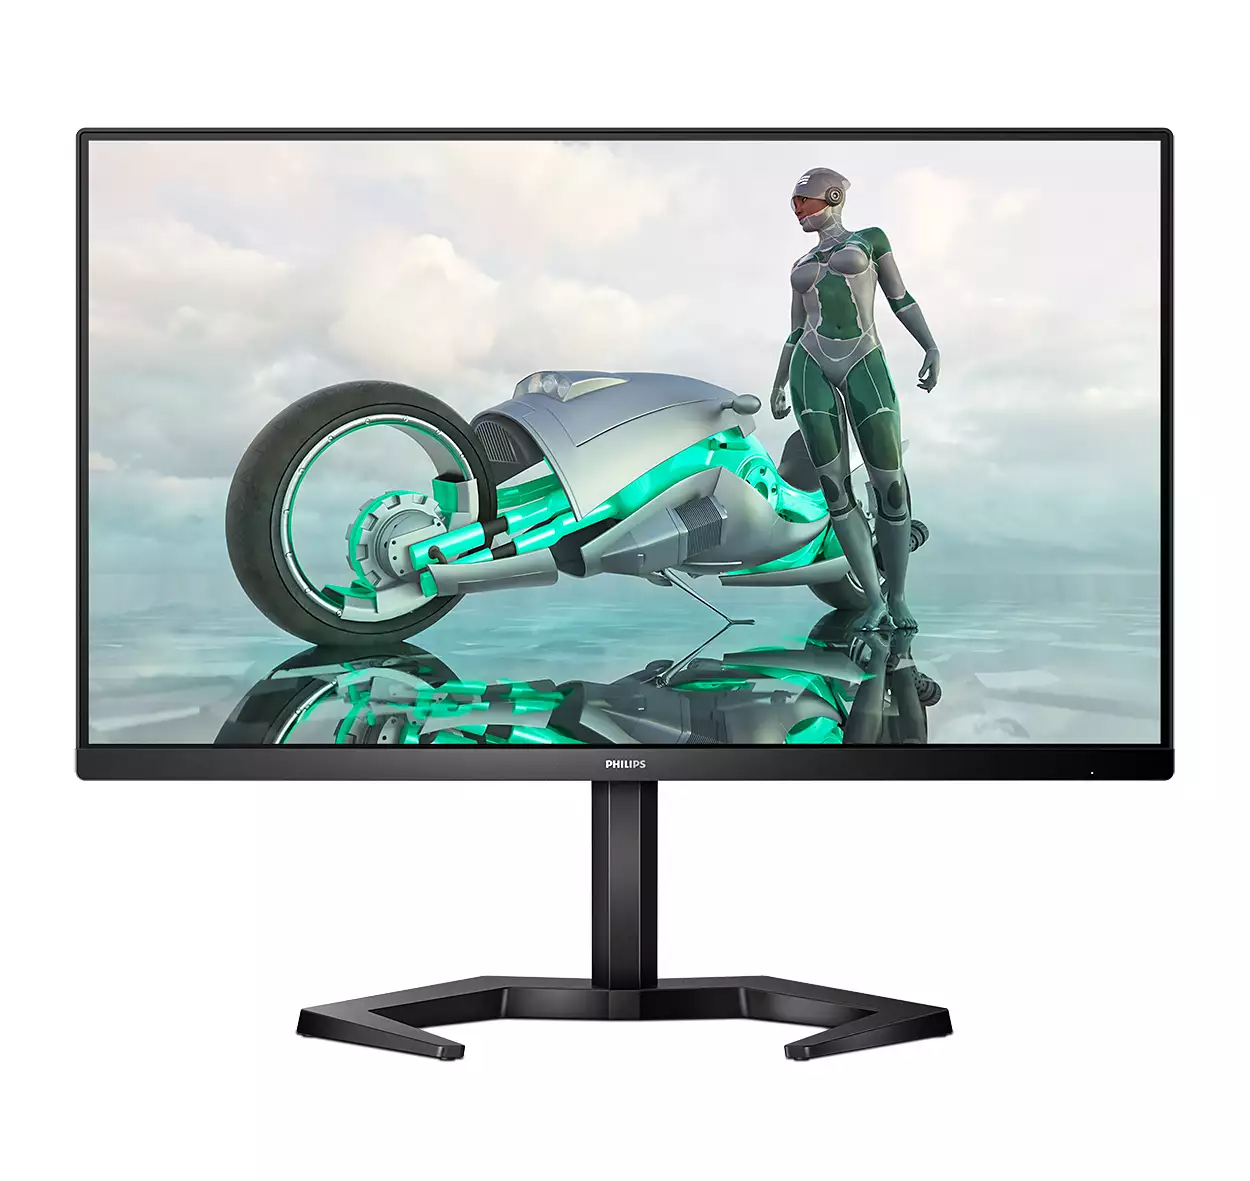 Monitor 23.8" Philips Evnia 3000 Gaming FHD 1920x1080p IPS 165Hz 1ms 124%sRGB 250nits - Albagame